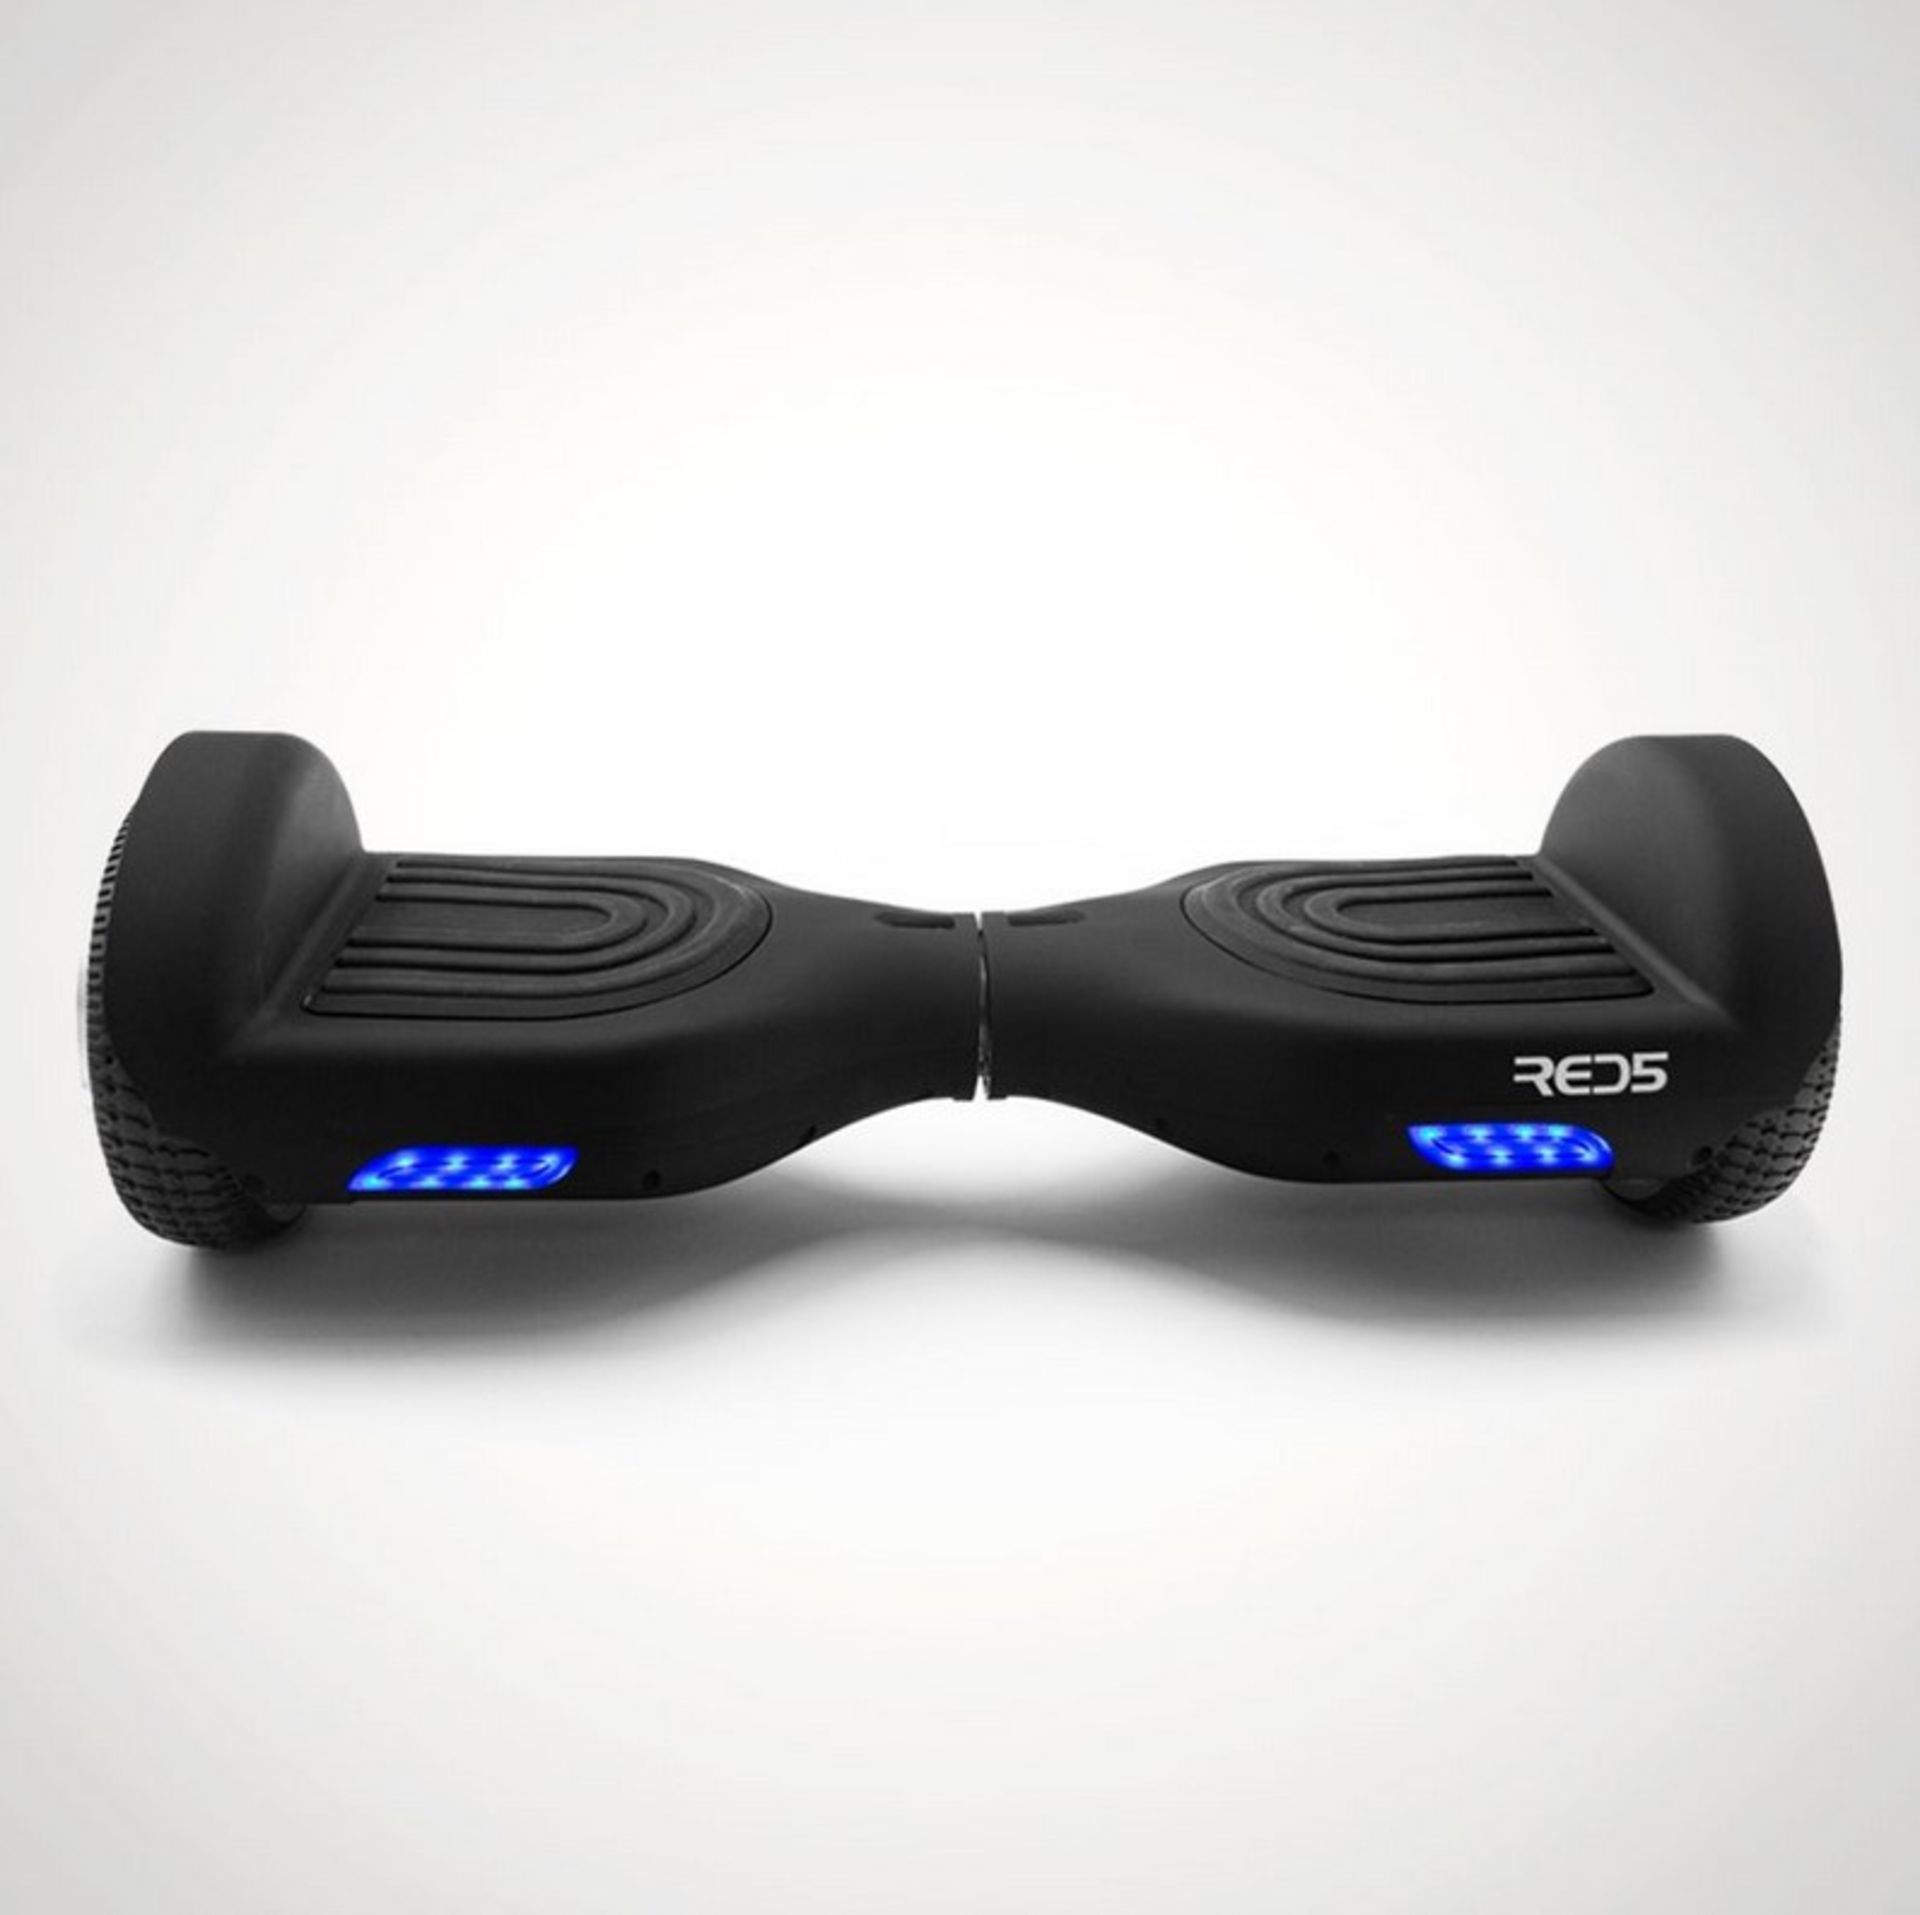 (3/5P) RRP £199. Red5 Hoverboard Pro. Top Speed 9km/h. Range Up To 5.5 Miles. Built In Rechargeab... - Image 2 of 7